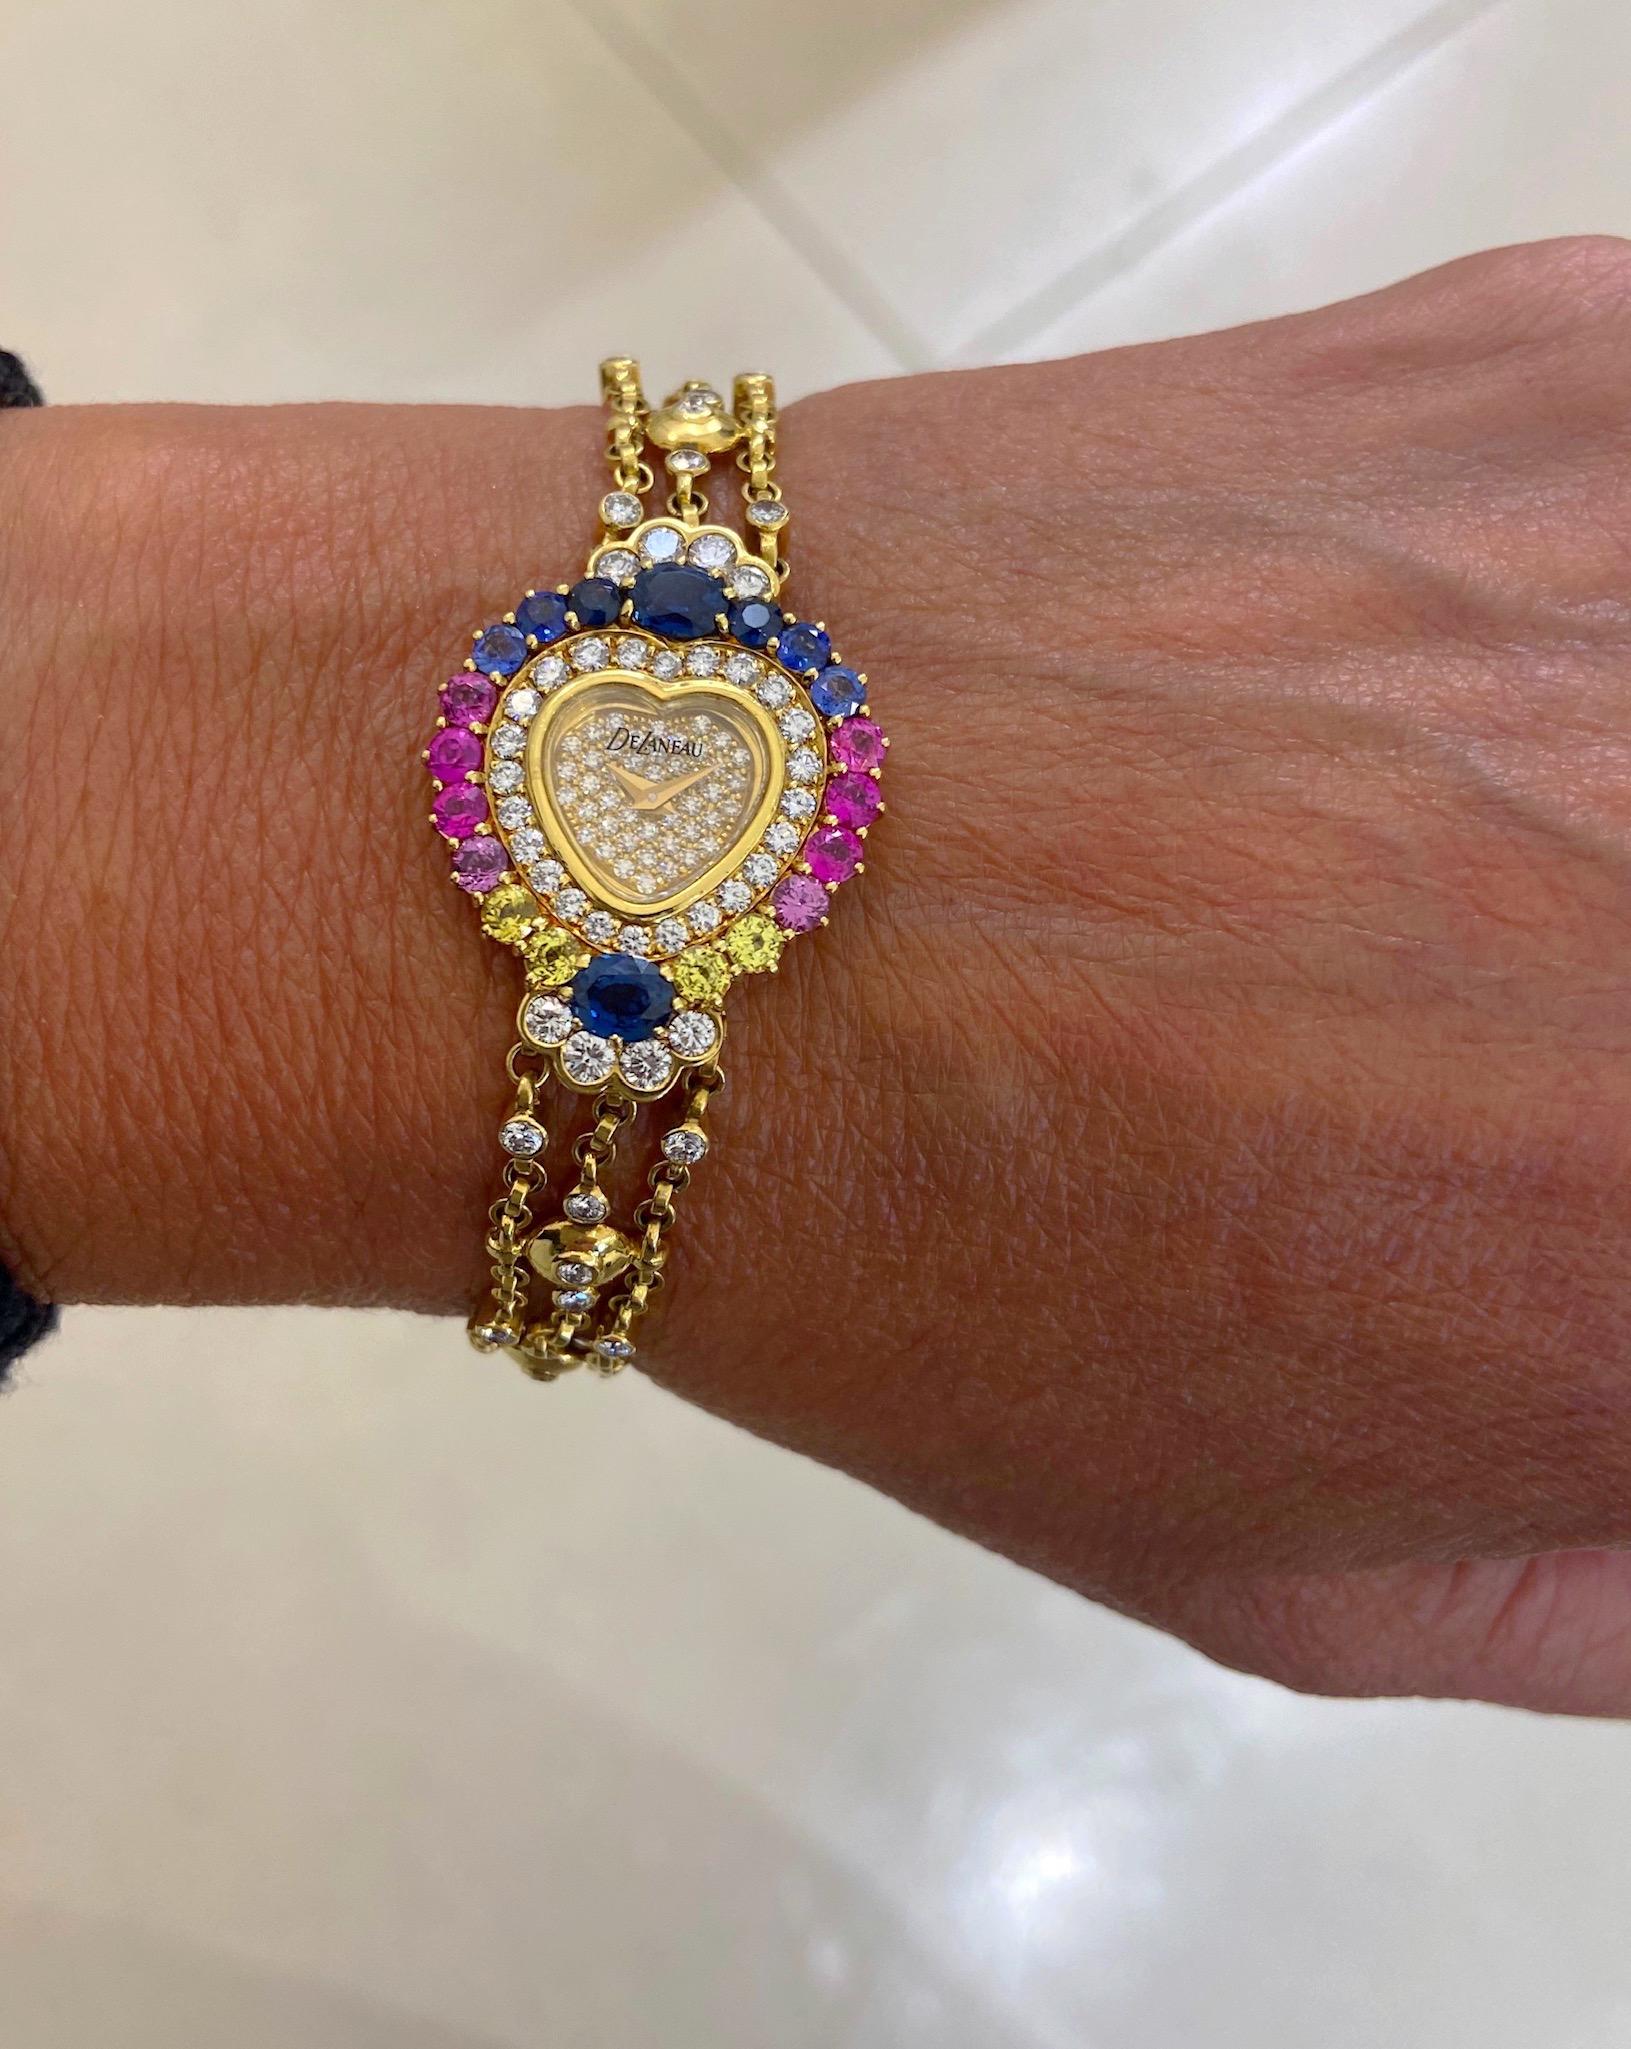 DeLaneau 18 Karat Gold Diamond and Multicolored Sapphires Heart Shaped Watch In New Condition For Sale In New York, NY